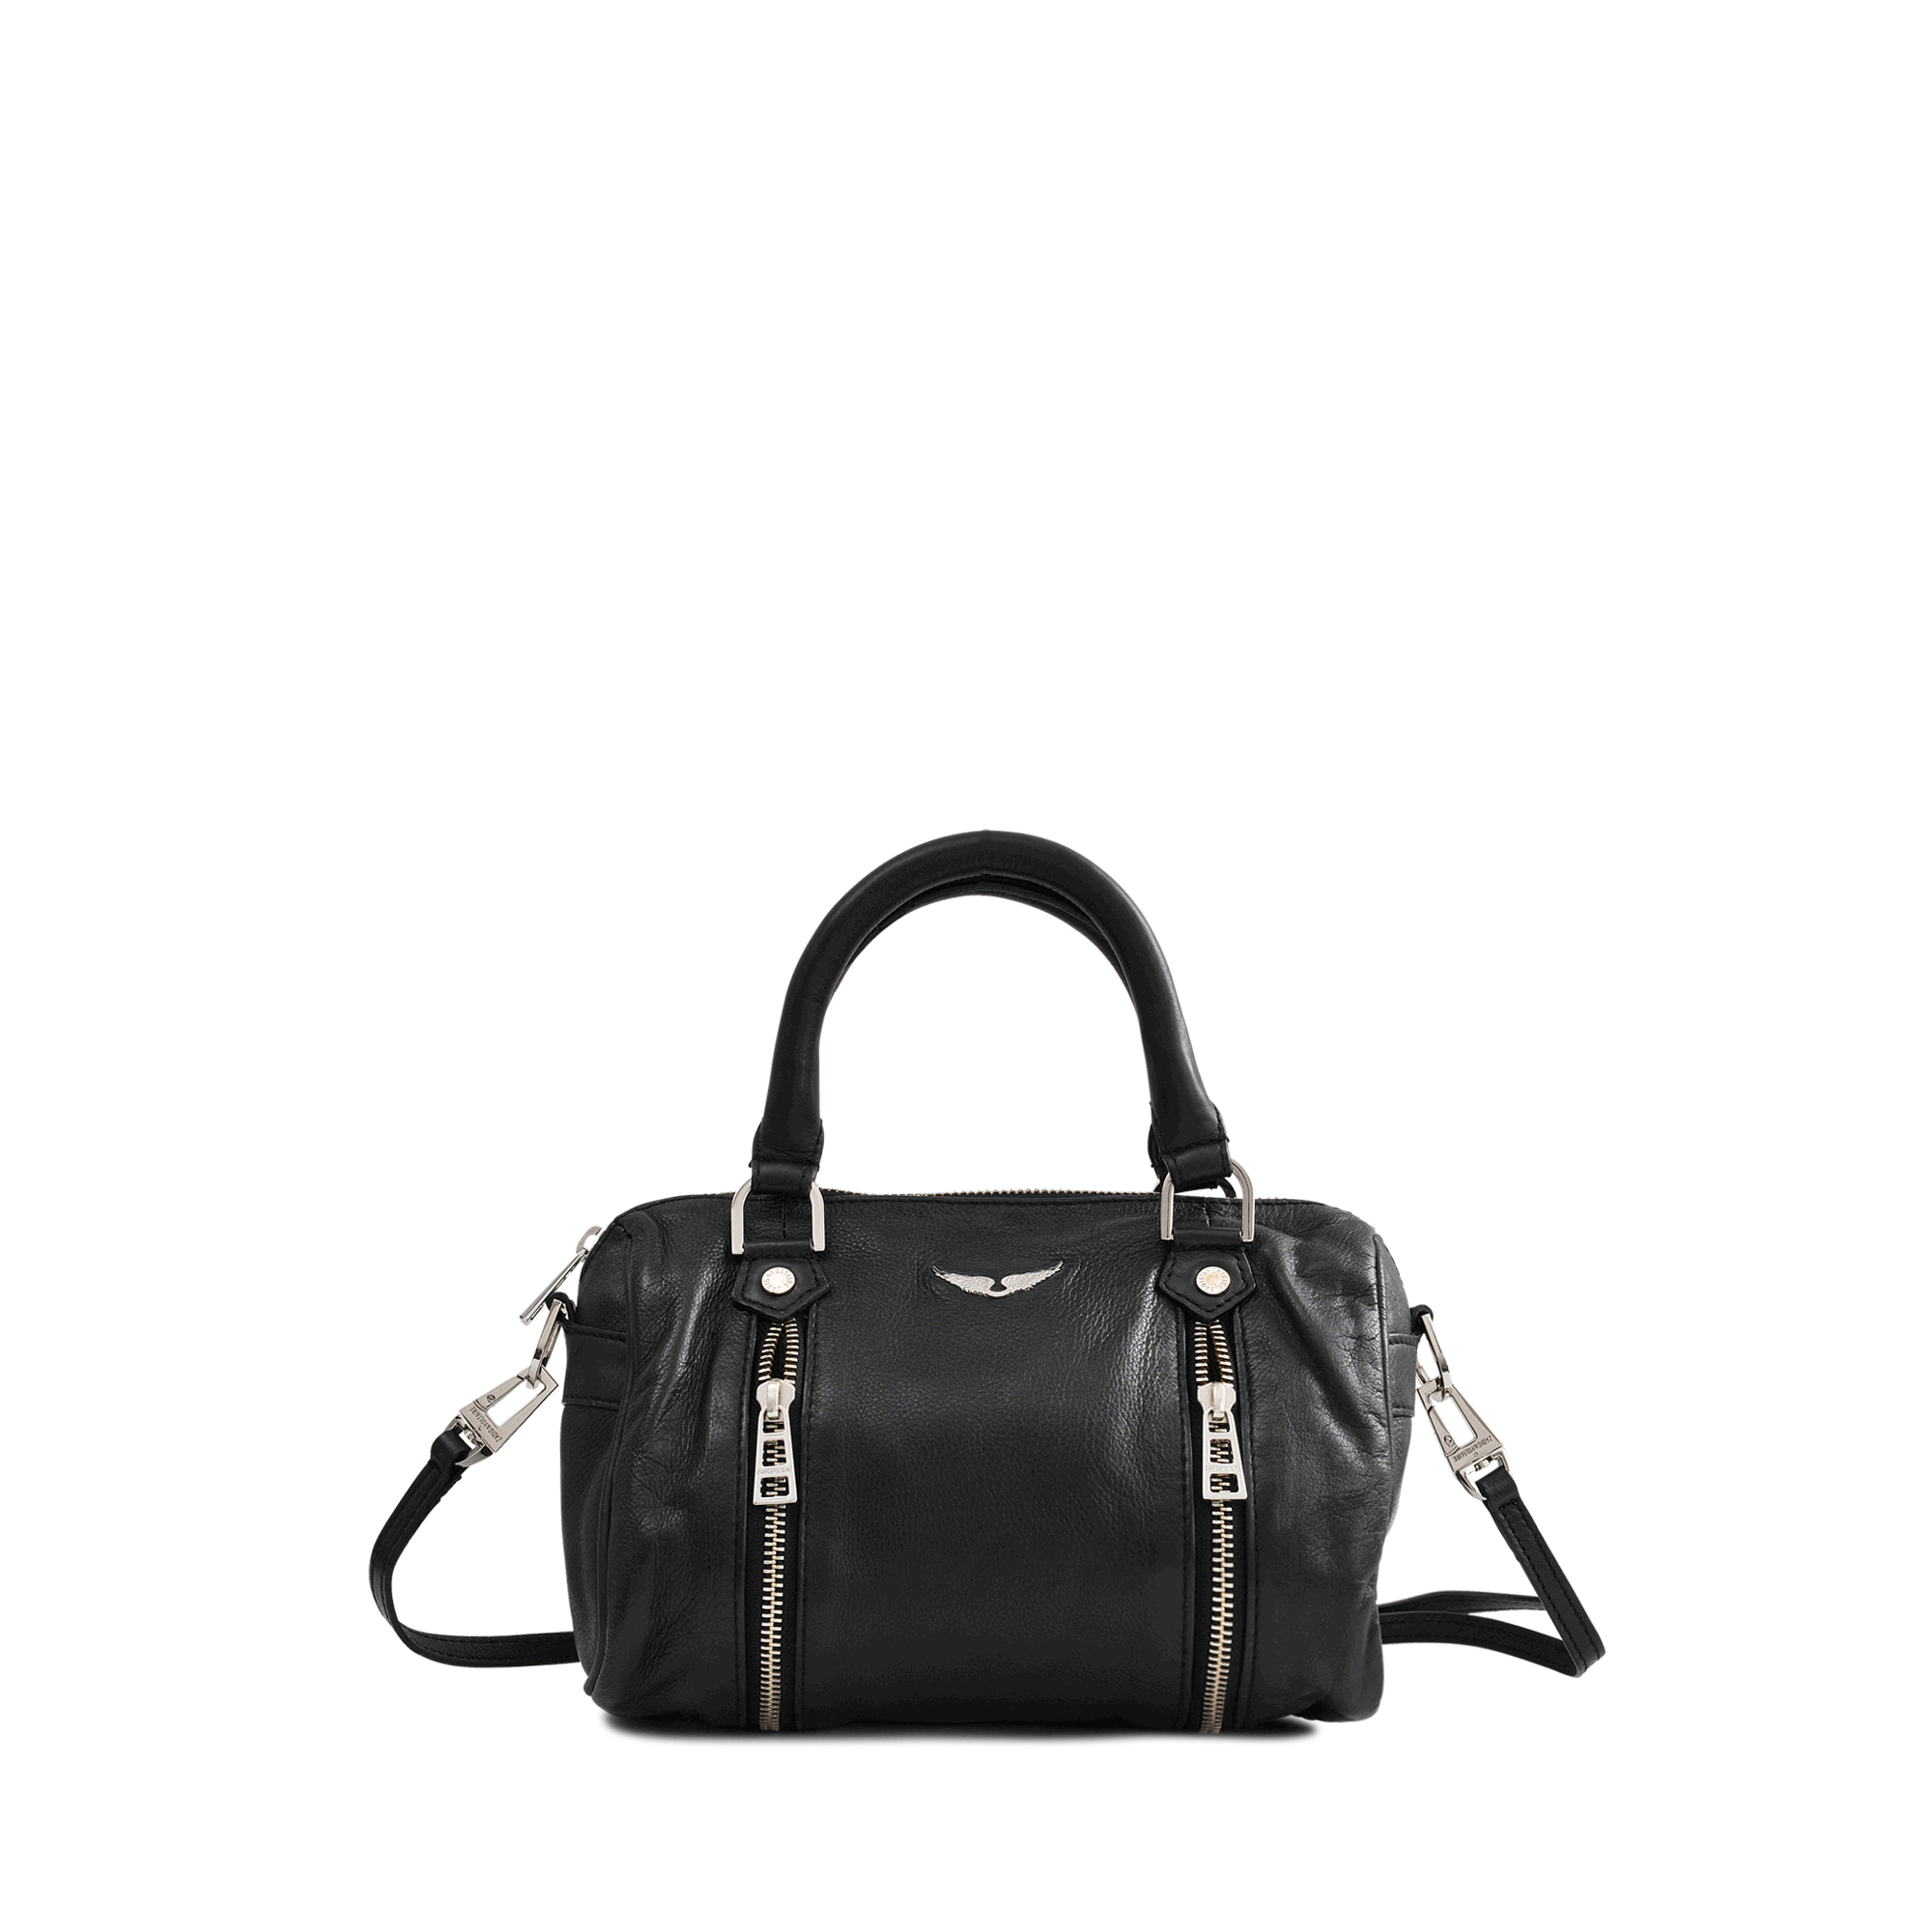 sunny zadig and voltaire bag